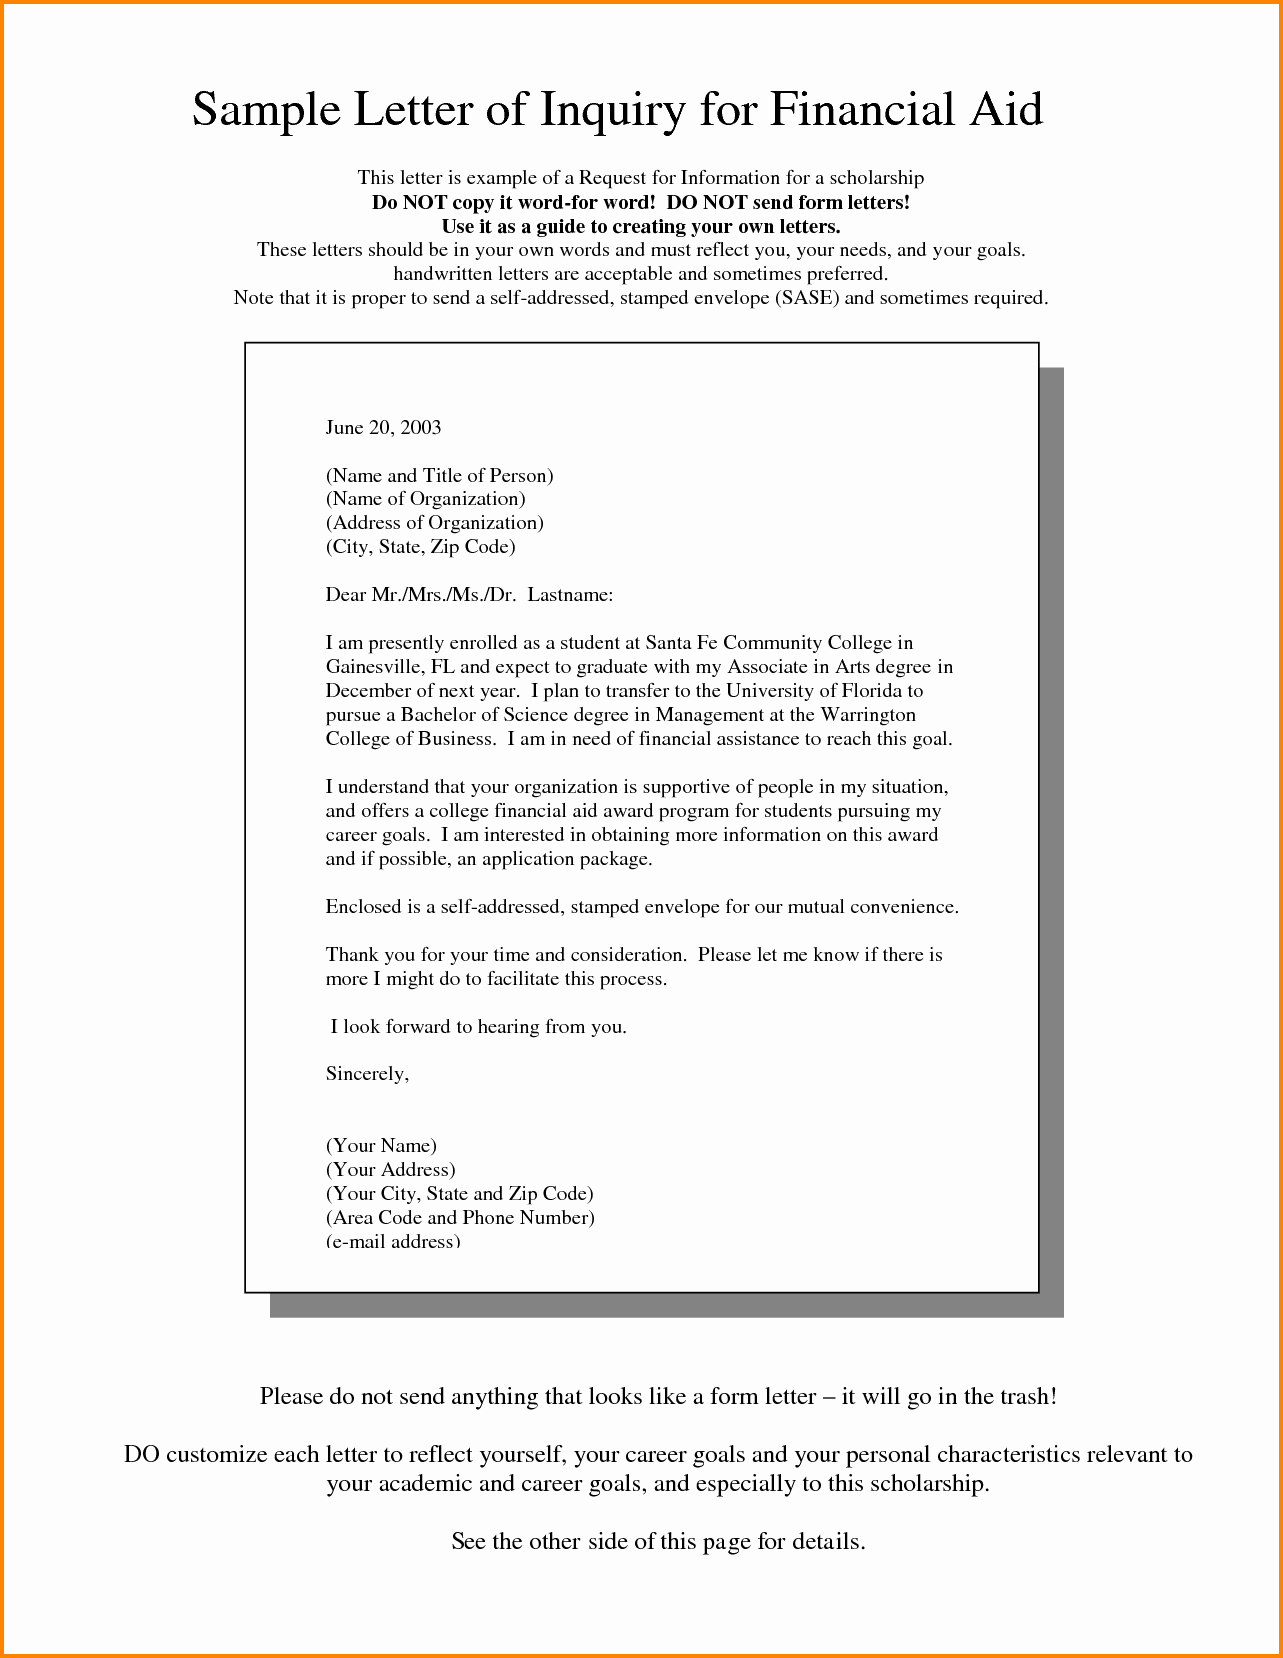 Sample Letter Of Financial Support Fresh 8 How to Write A Letter asking for Financial Support